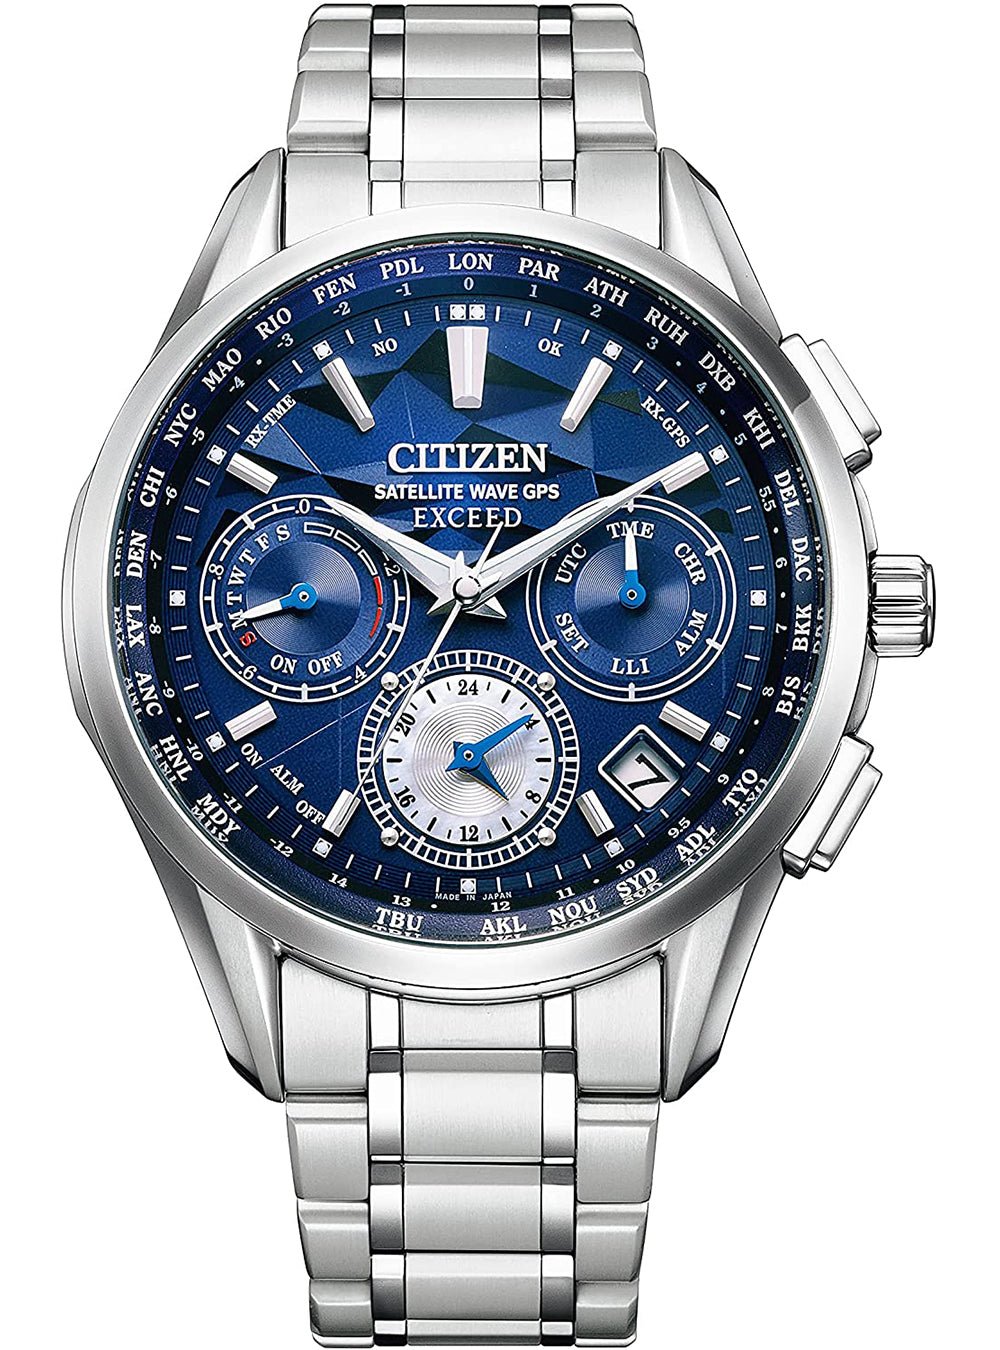 CITIZEN EXCEED CITIZEN YELL COLLECTION ECO-DRIVE CC4030-58L MADE IN JAPAN LIMITED 600 JDMWRISTWATCHjapan-select